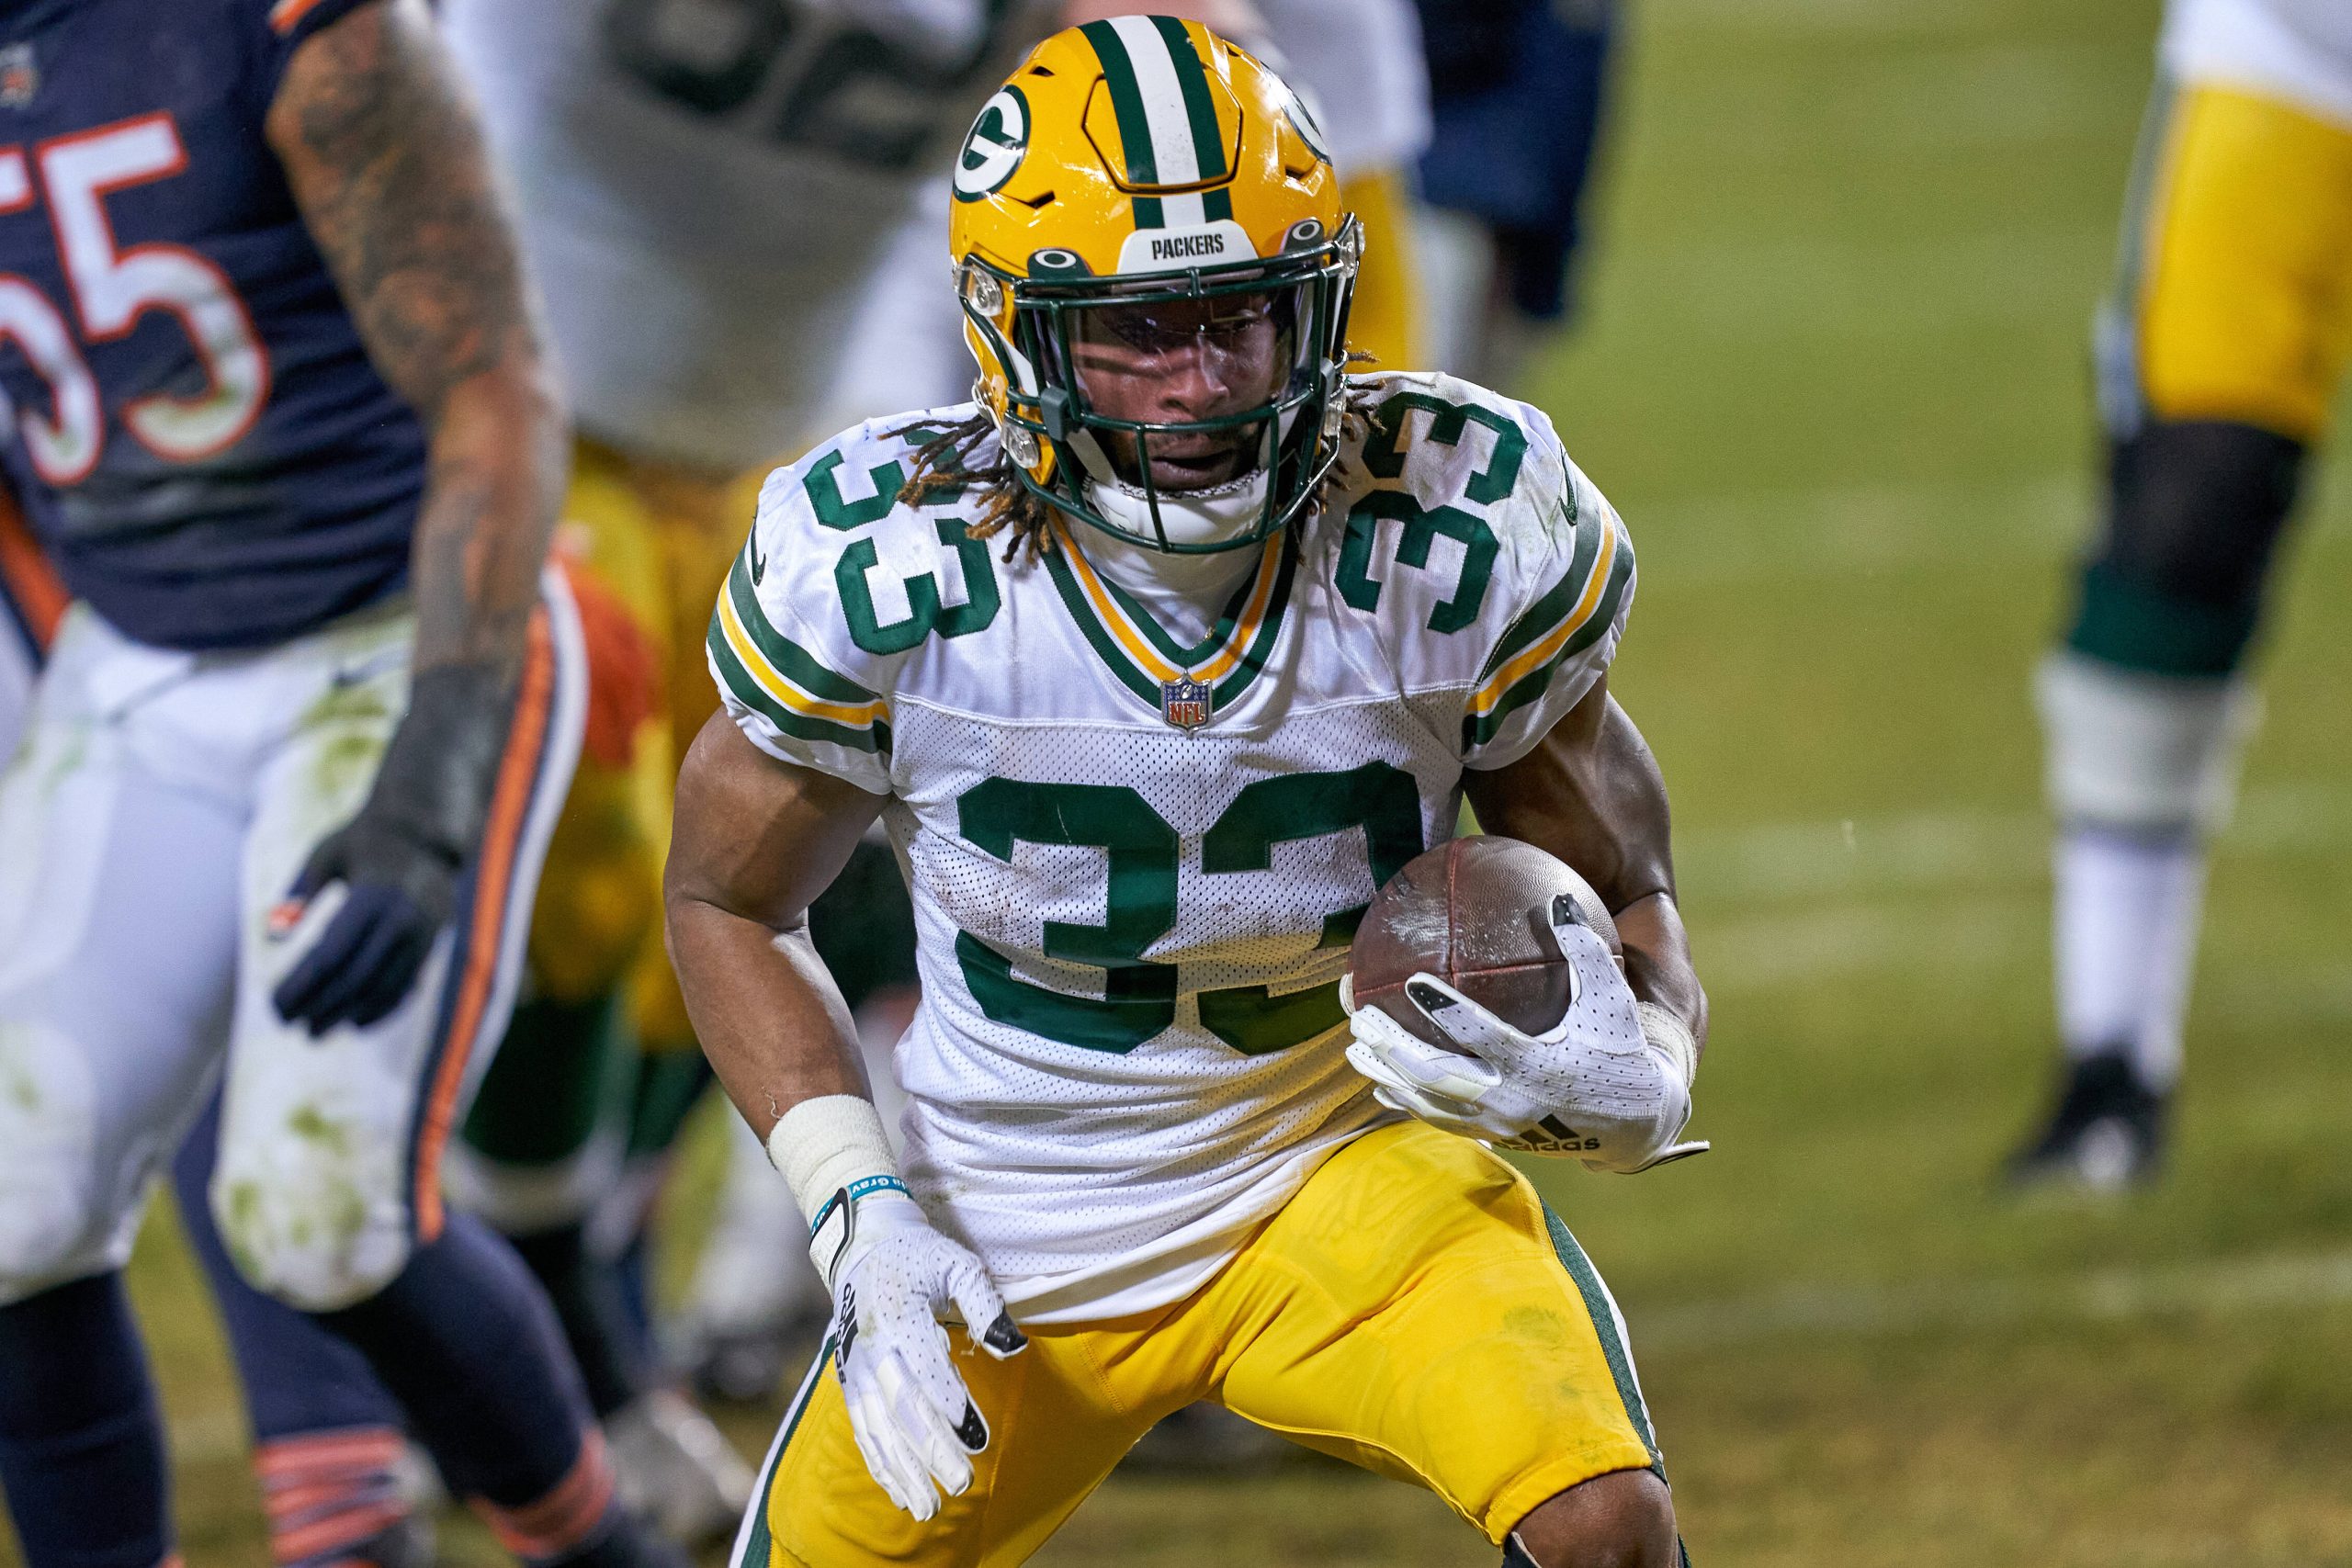 NFL Free Agents 2021 - Green Bay Packers running back Aaron Jones (33) runs with the football in action during a game